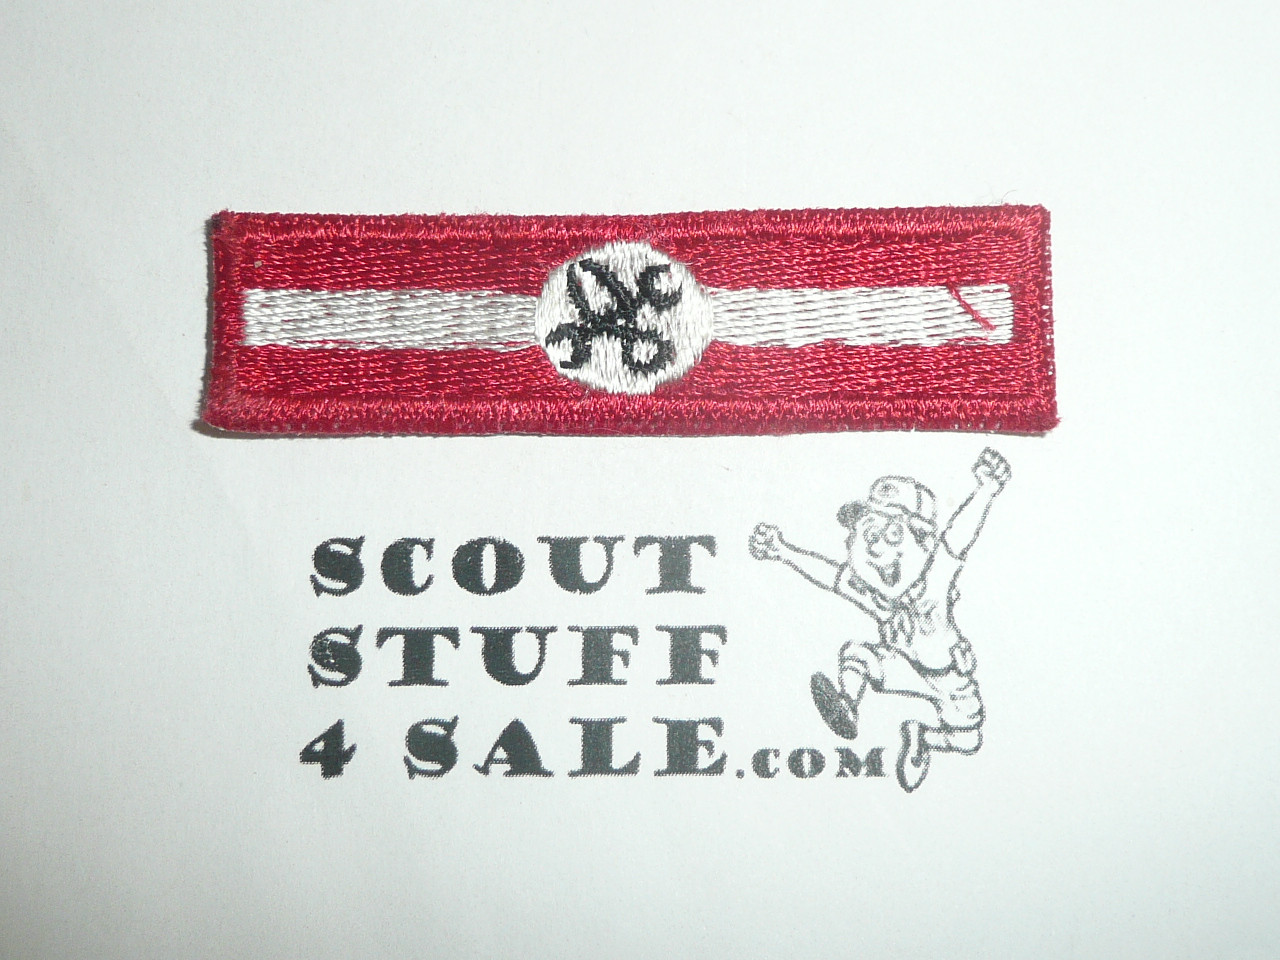 Explorer Scout Rating Strip Patch, 1950's, Craft Skills